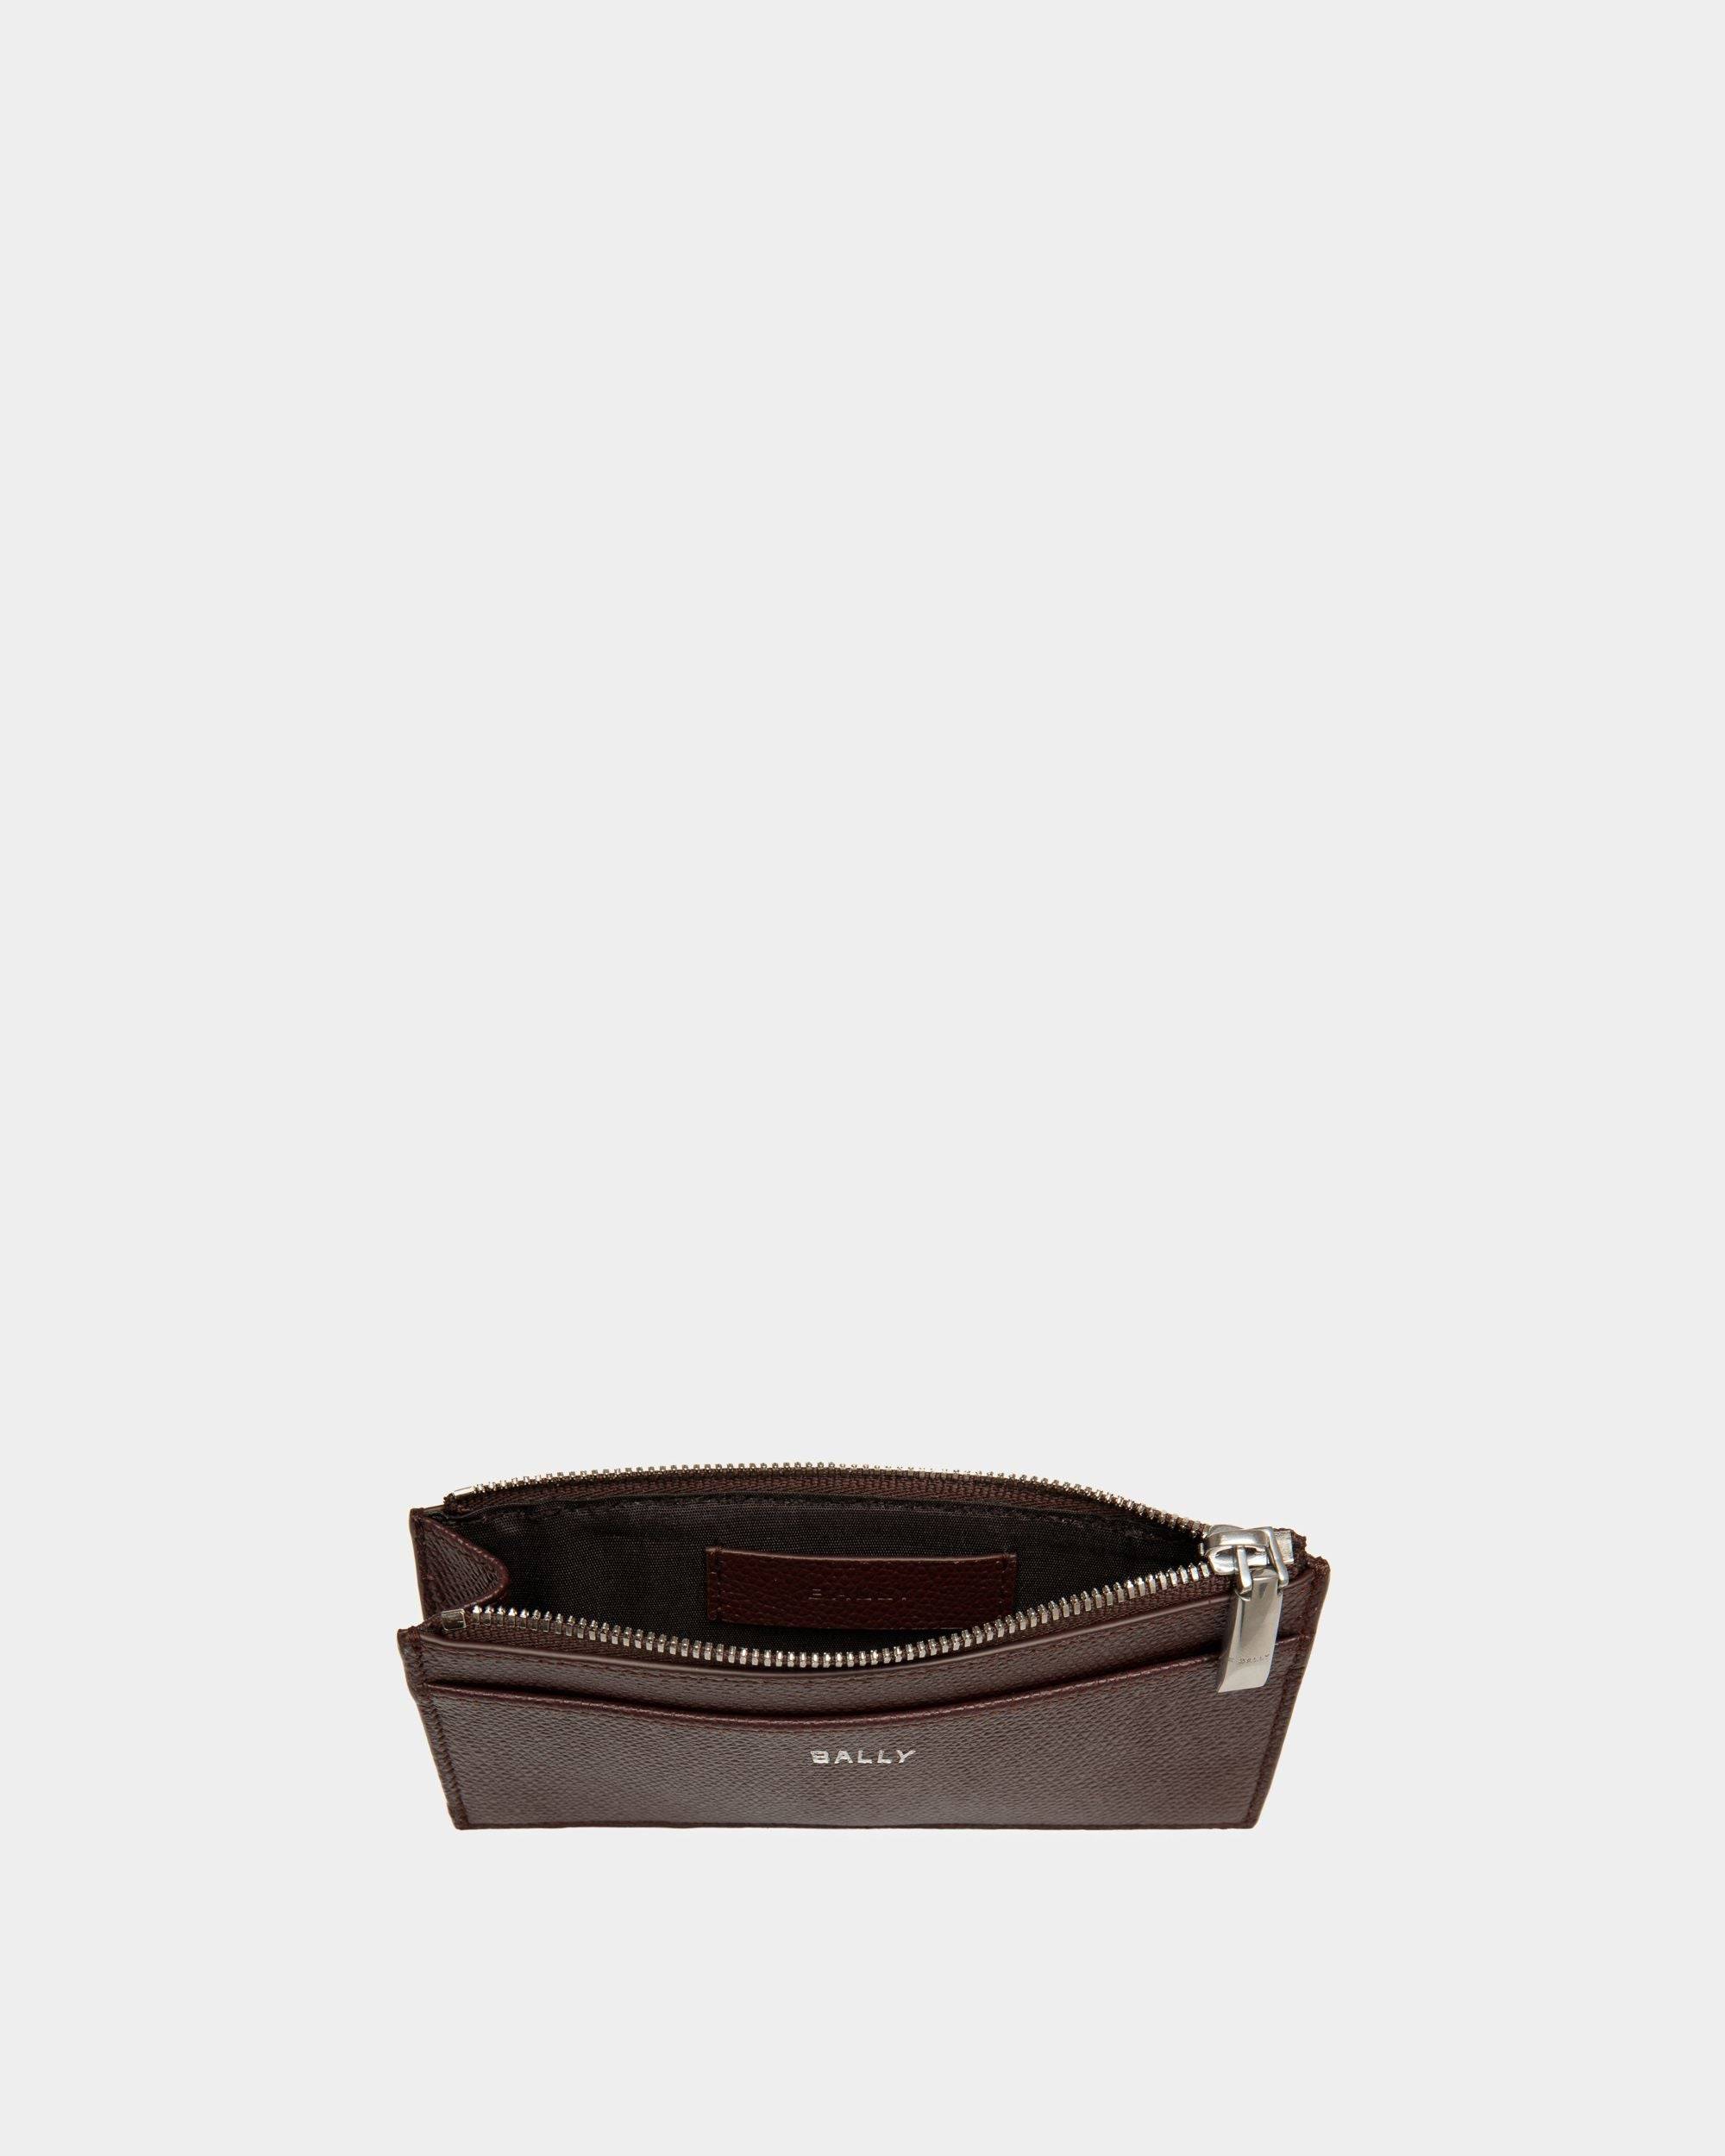 Flag | Men's Coin and Card Holder in Chestnut Brown and Red Embossed Leather | Bally | Still Life Open / Inside